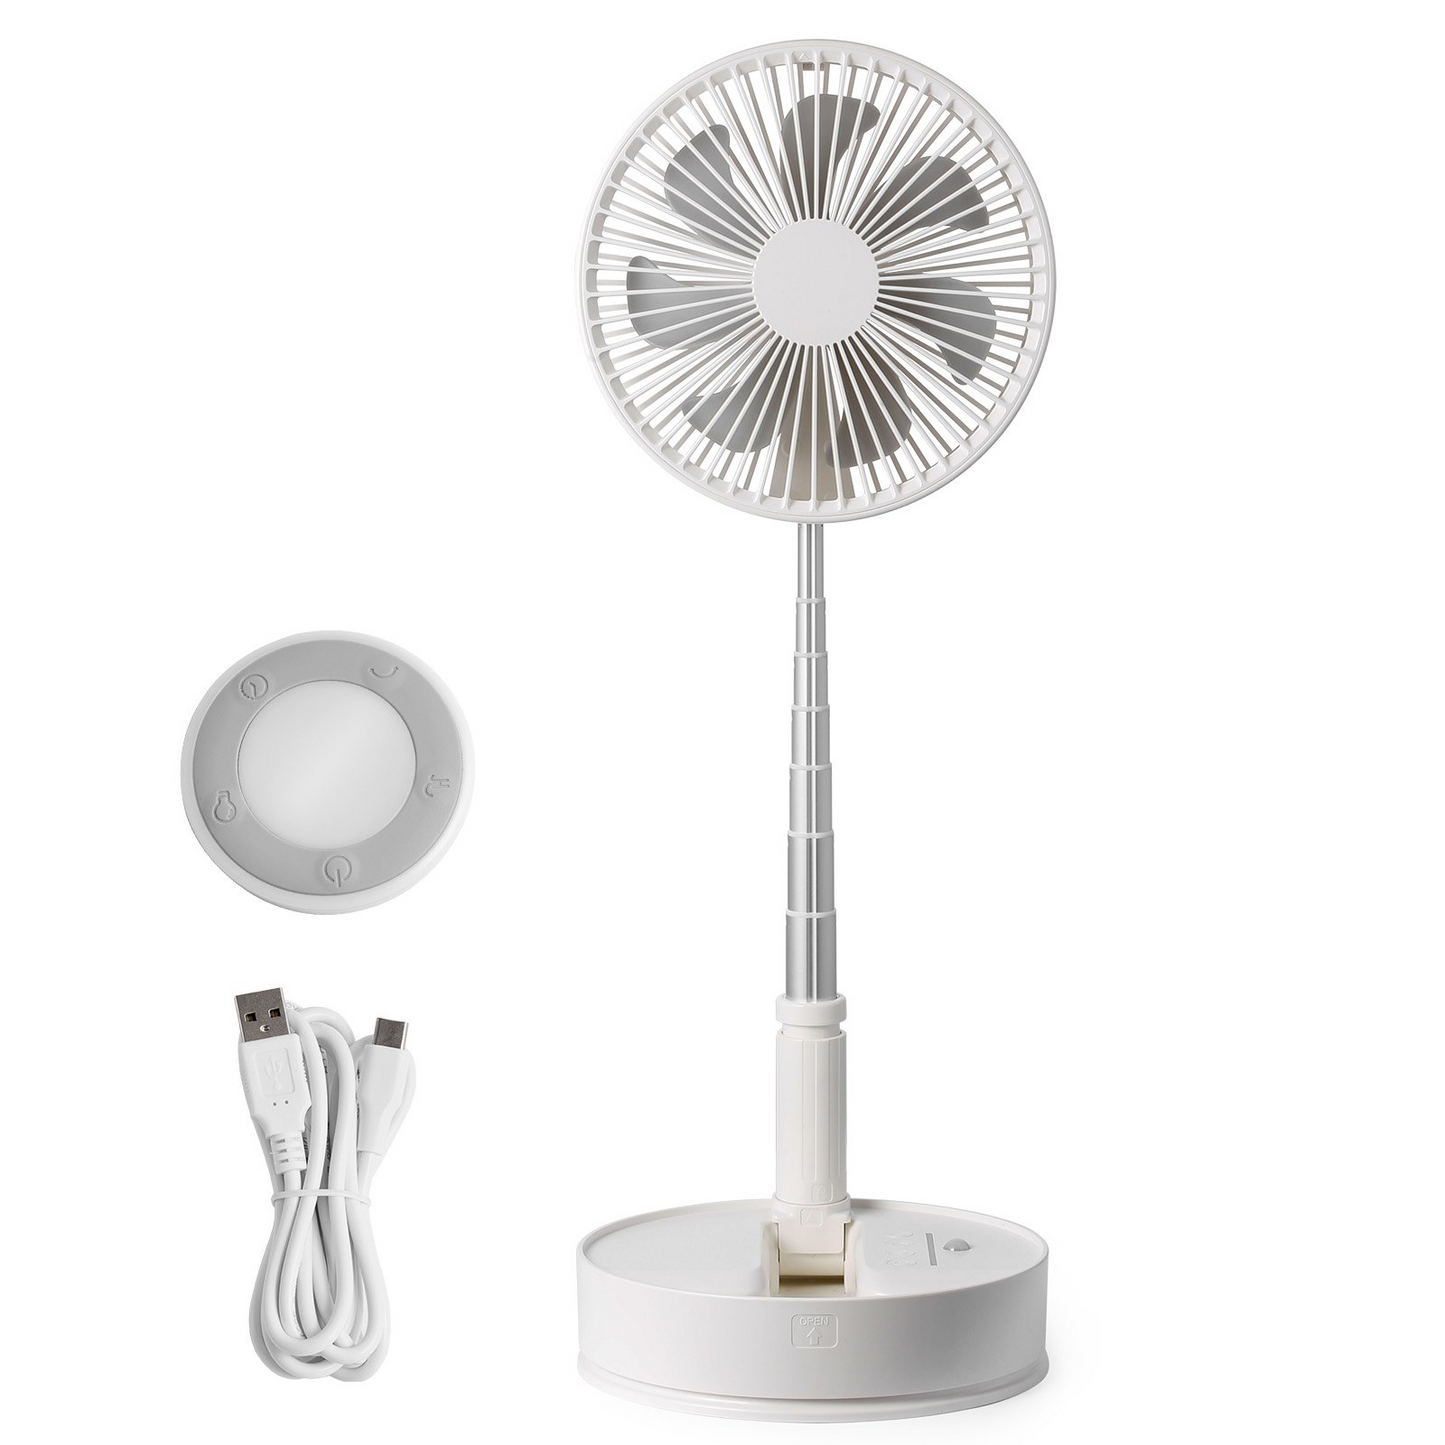 VEVOR 8 Inch Foldable Oscillating Standing Fan with Remote Control, 4 Speed Adjustable Portable Desk Quiet Fan, 7200mah Rechargeable USB Small Fan, Folded Rotating Floor Fan for Bedroom Office Travel, Goodies N Stuff